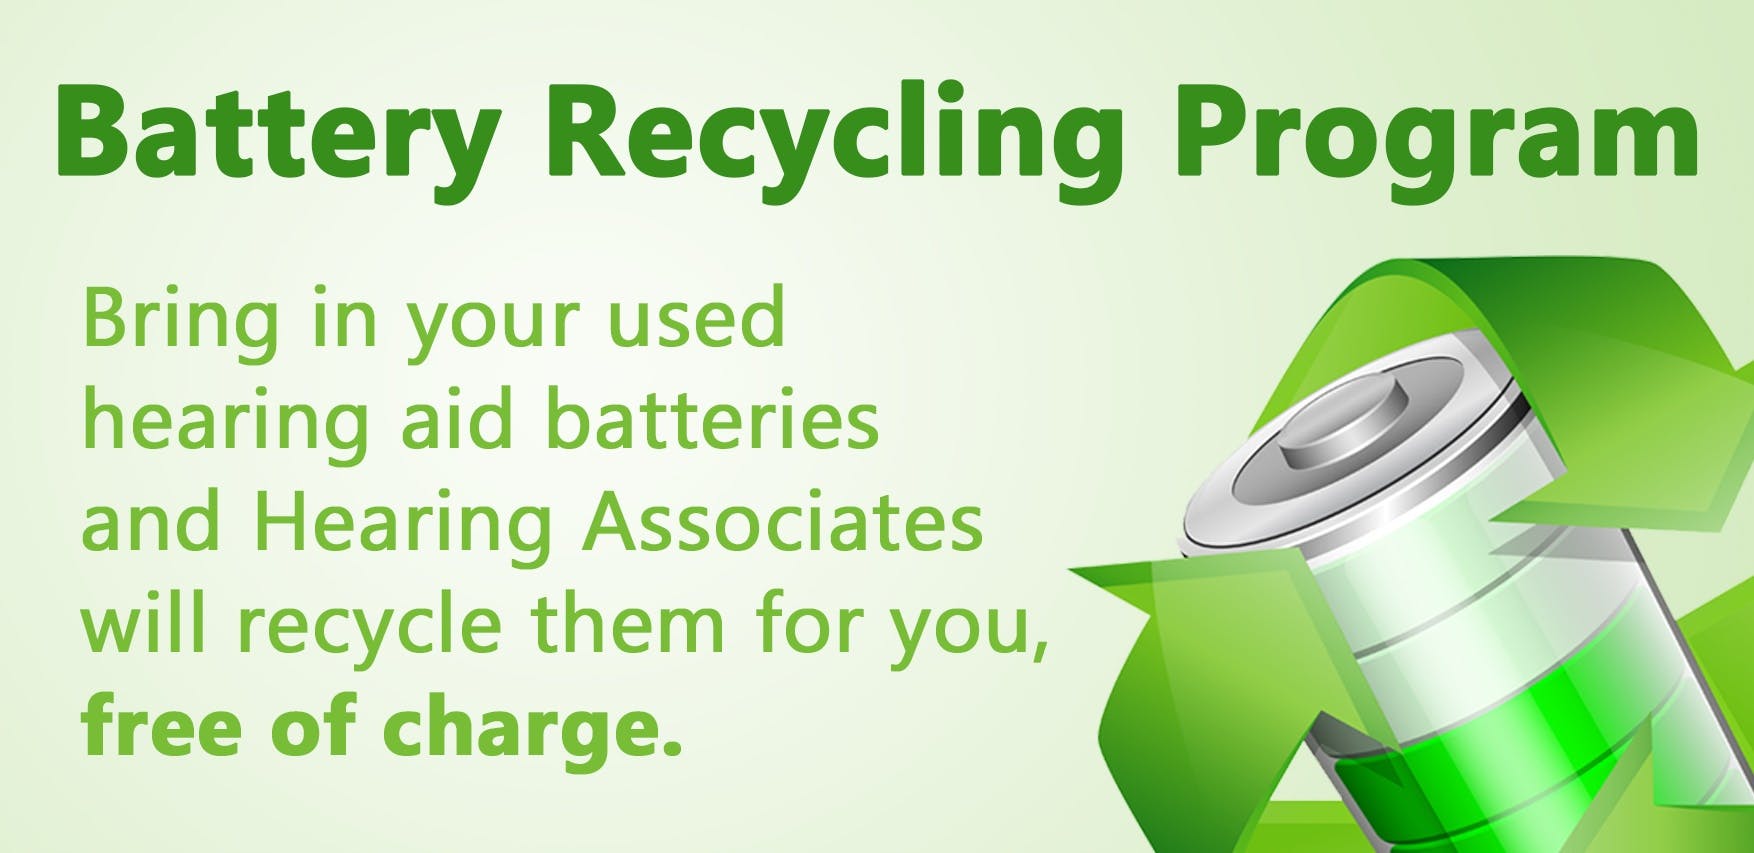 Hearing aid battery recycling program graphic